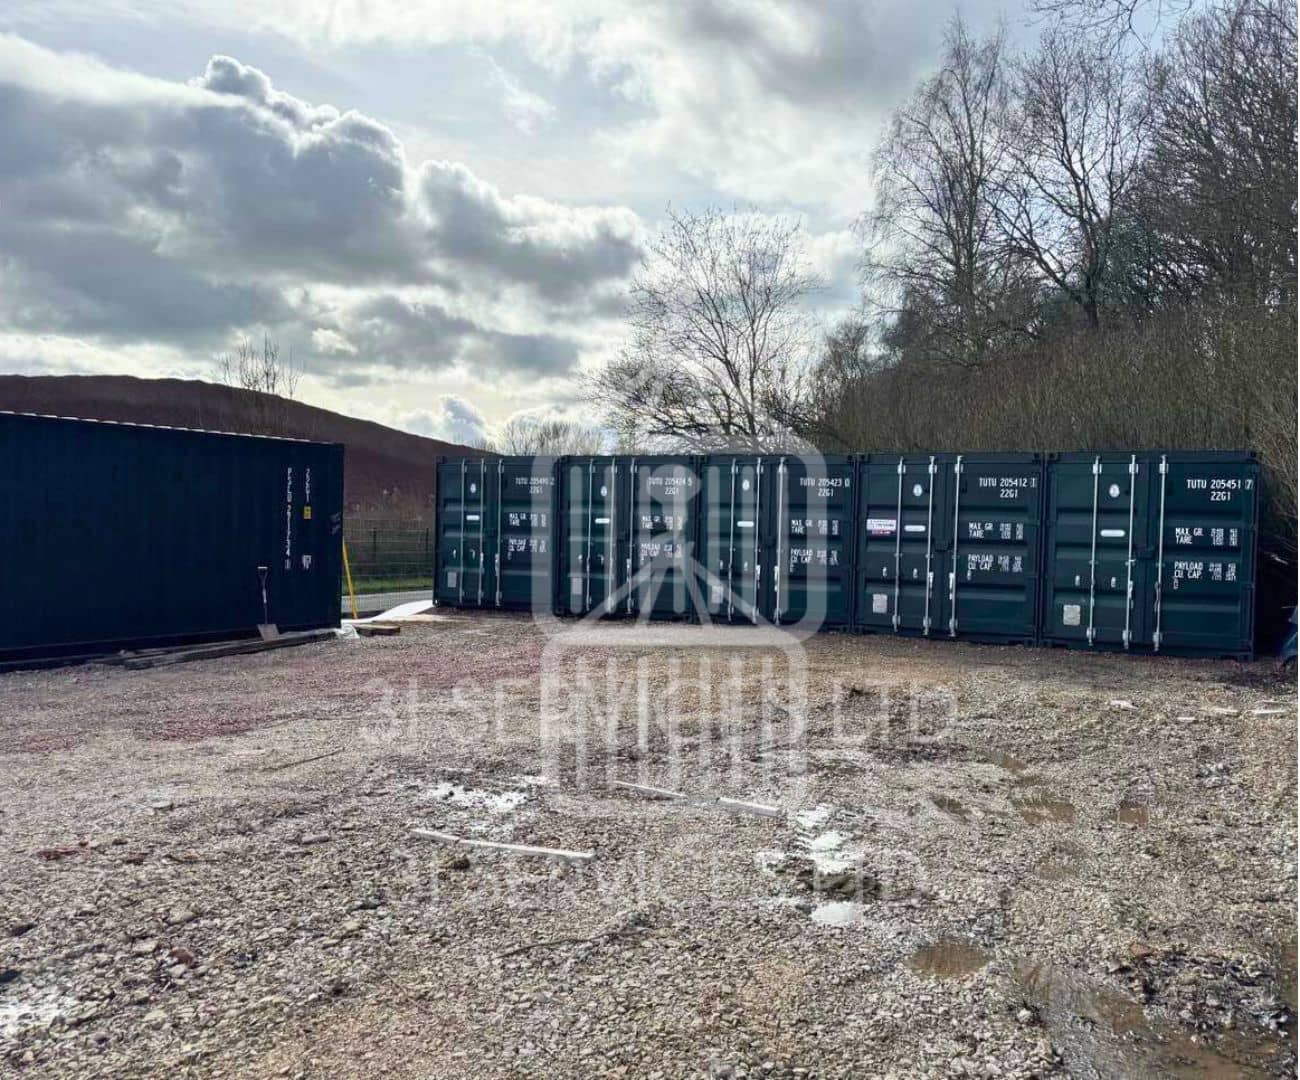 Self Storage 20ft Containers